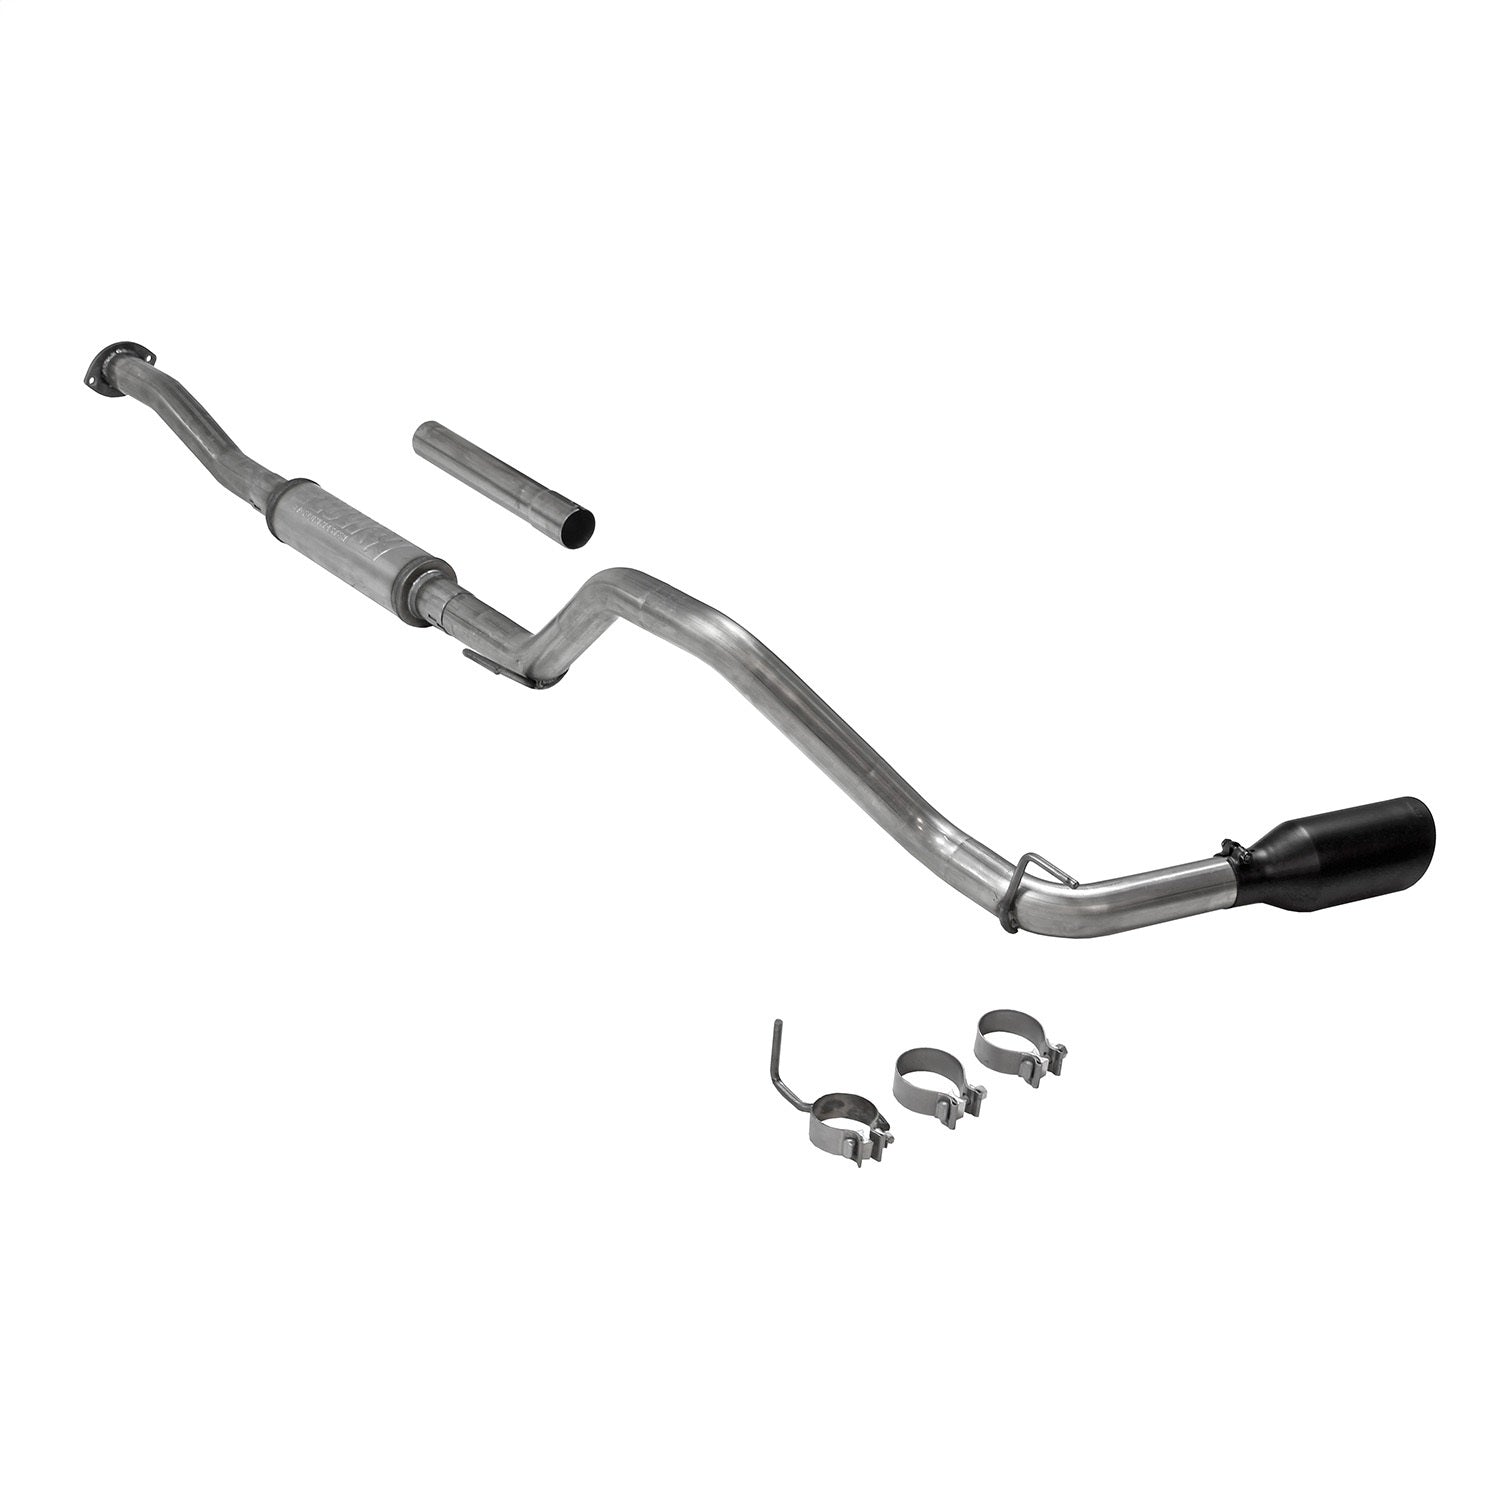 Flowmaster 717944 FlowFX Cat-Back Exhaust System Fits 16-20 Tacoma